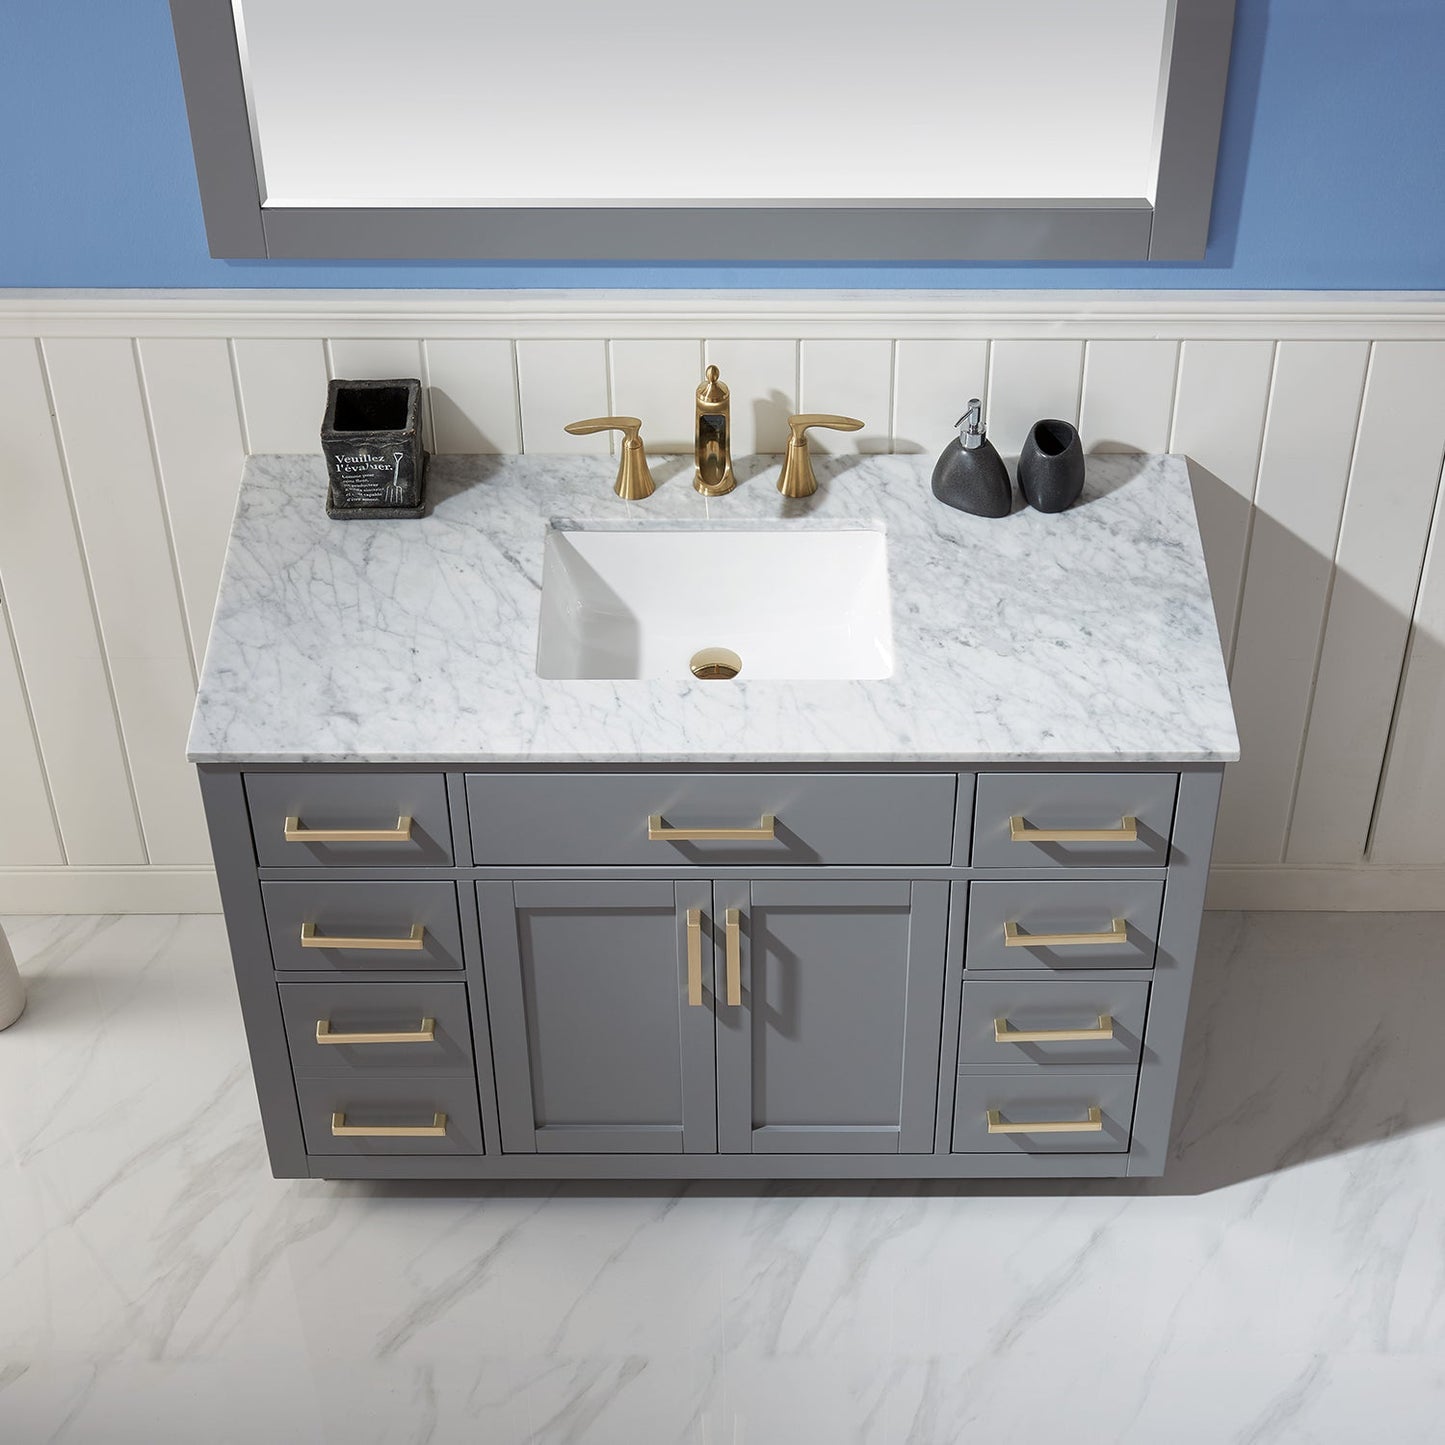 Ivy 48" Single Bathroom Vanity Set in Gray and Carrara White Marble Countertop with Mirror